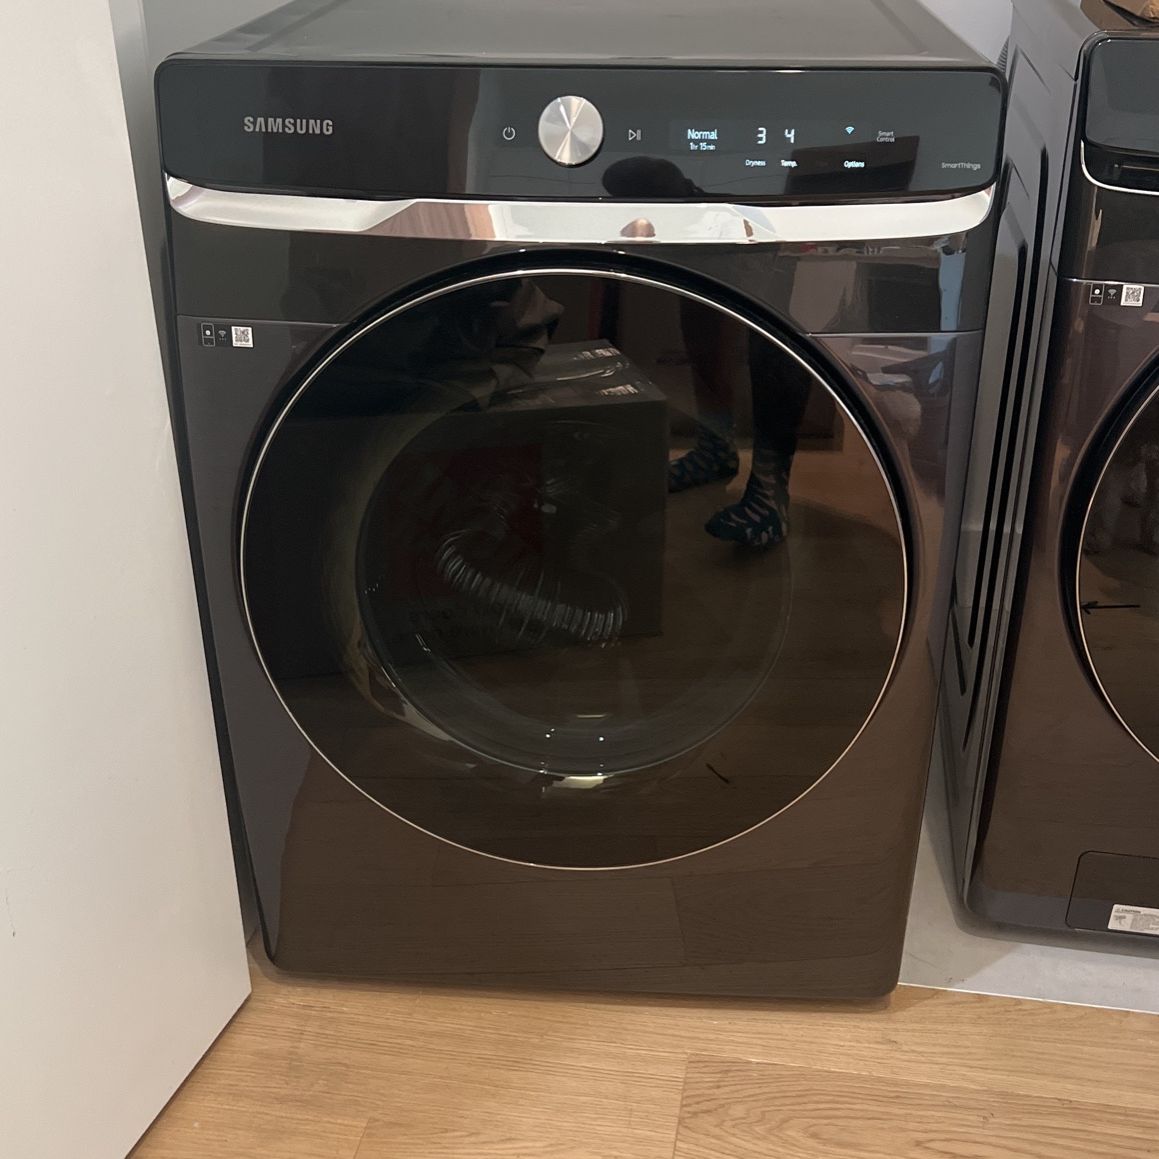 Samsung - 7.5 Cu. Ft. Stackable Smart Electric Dryer with Steam and Super Speed Dry - Brushed Black.See more images Samsung - 7.5 Cu. Ft. 